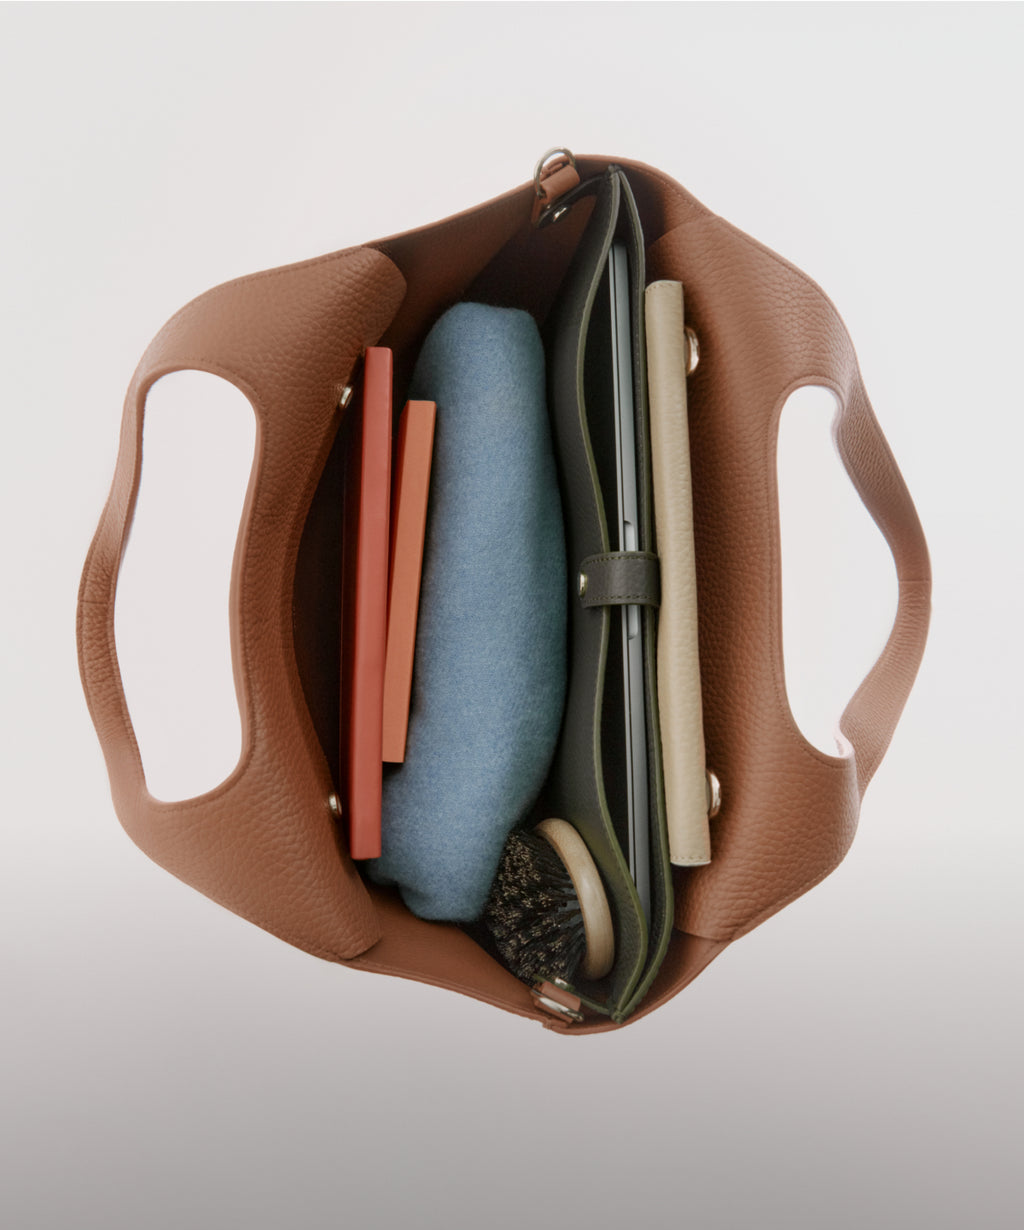 Linked Image: Directs to 9-5 Systems. A shop page with information on Cuyana product Systems. (cuyana.com/pages/your-9-5-system-system-tote). Image Description: Showing the Interior of the Cuyana System Tote in color Caramel. Inserted inside the tote are notebooks, a sweater, a hairbrush, a laptop in a laptop sleeve and a wallet.